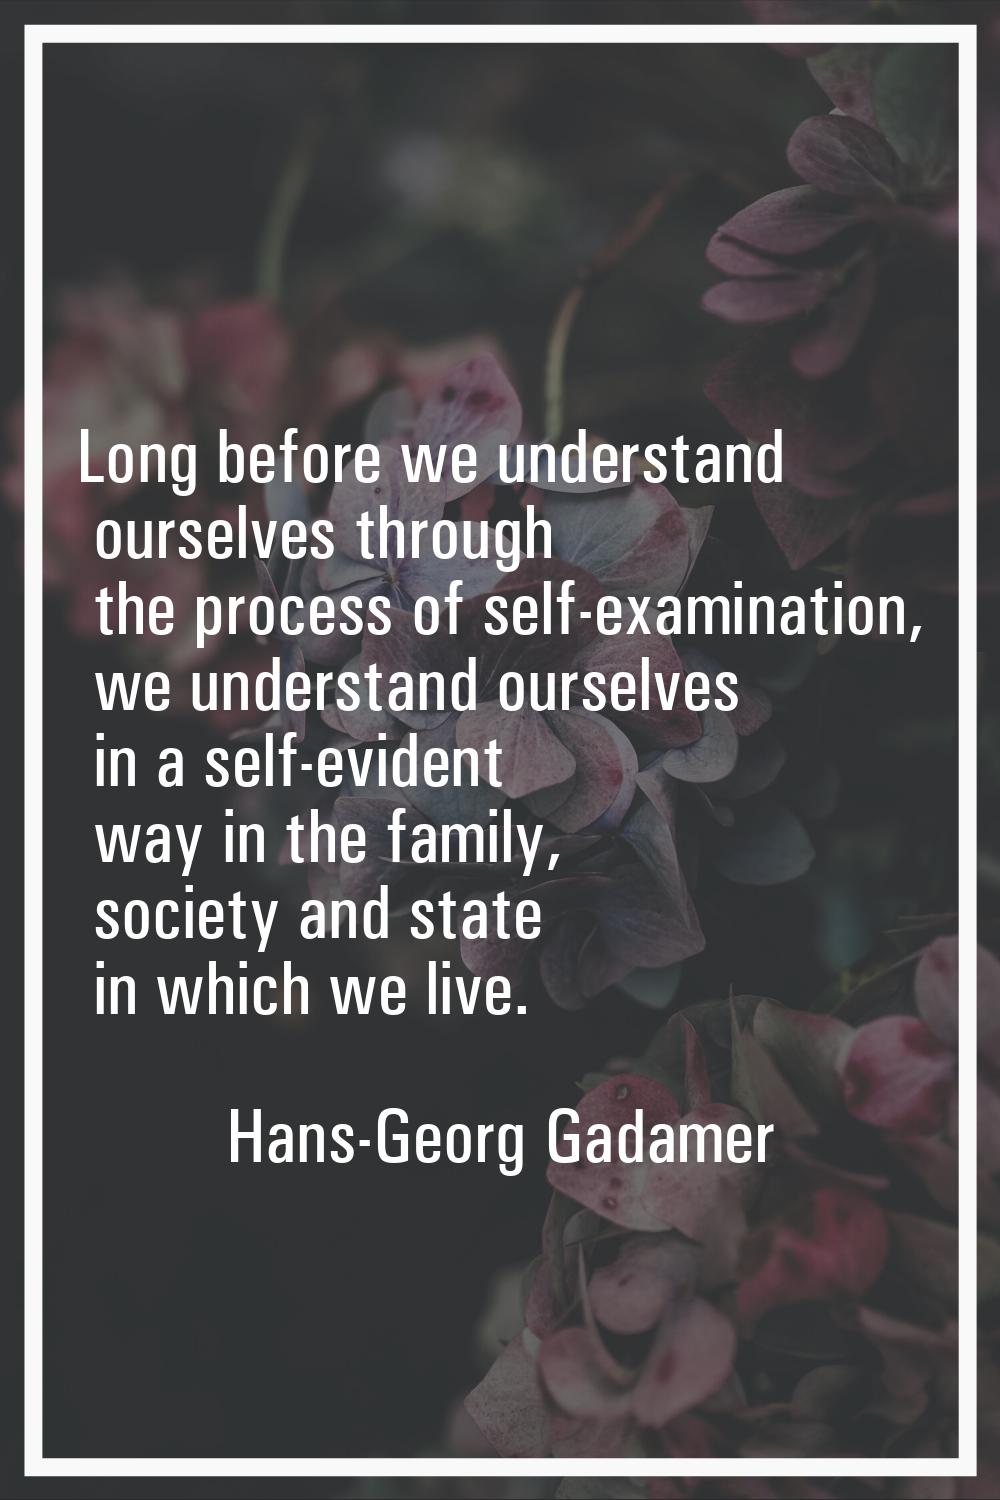 Long before we understand ourselves through the process of self-examination, we understand ourselve